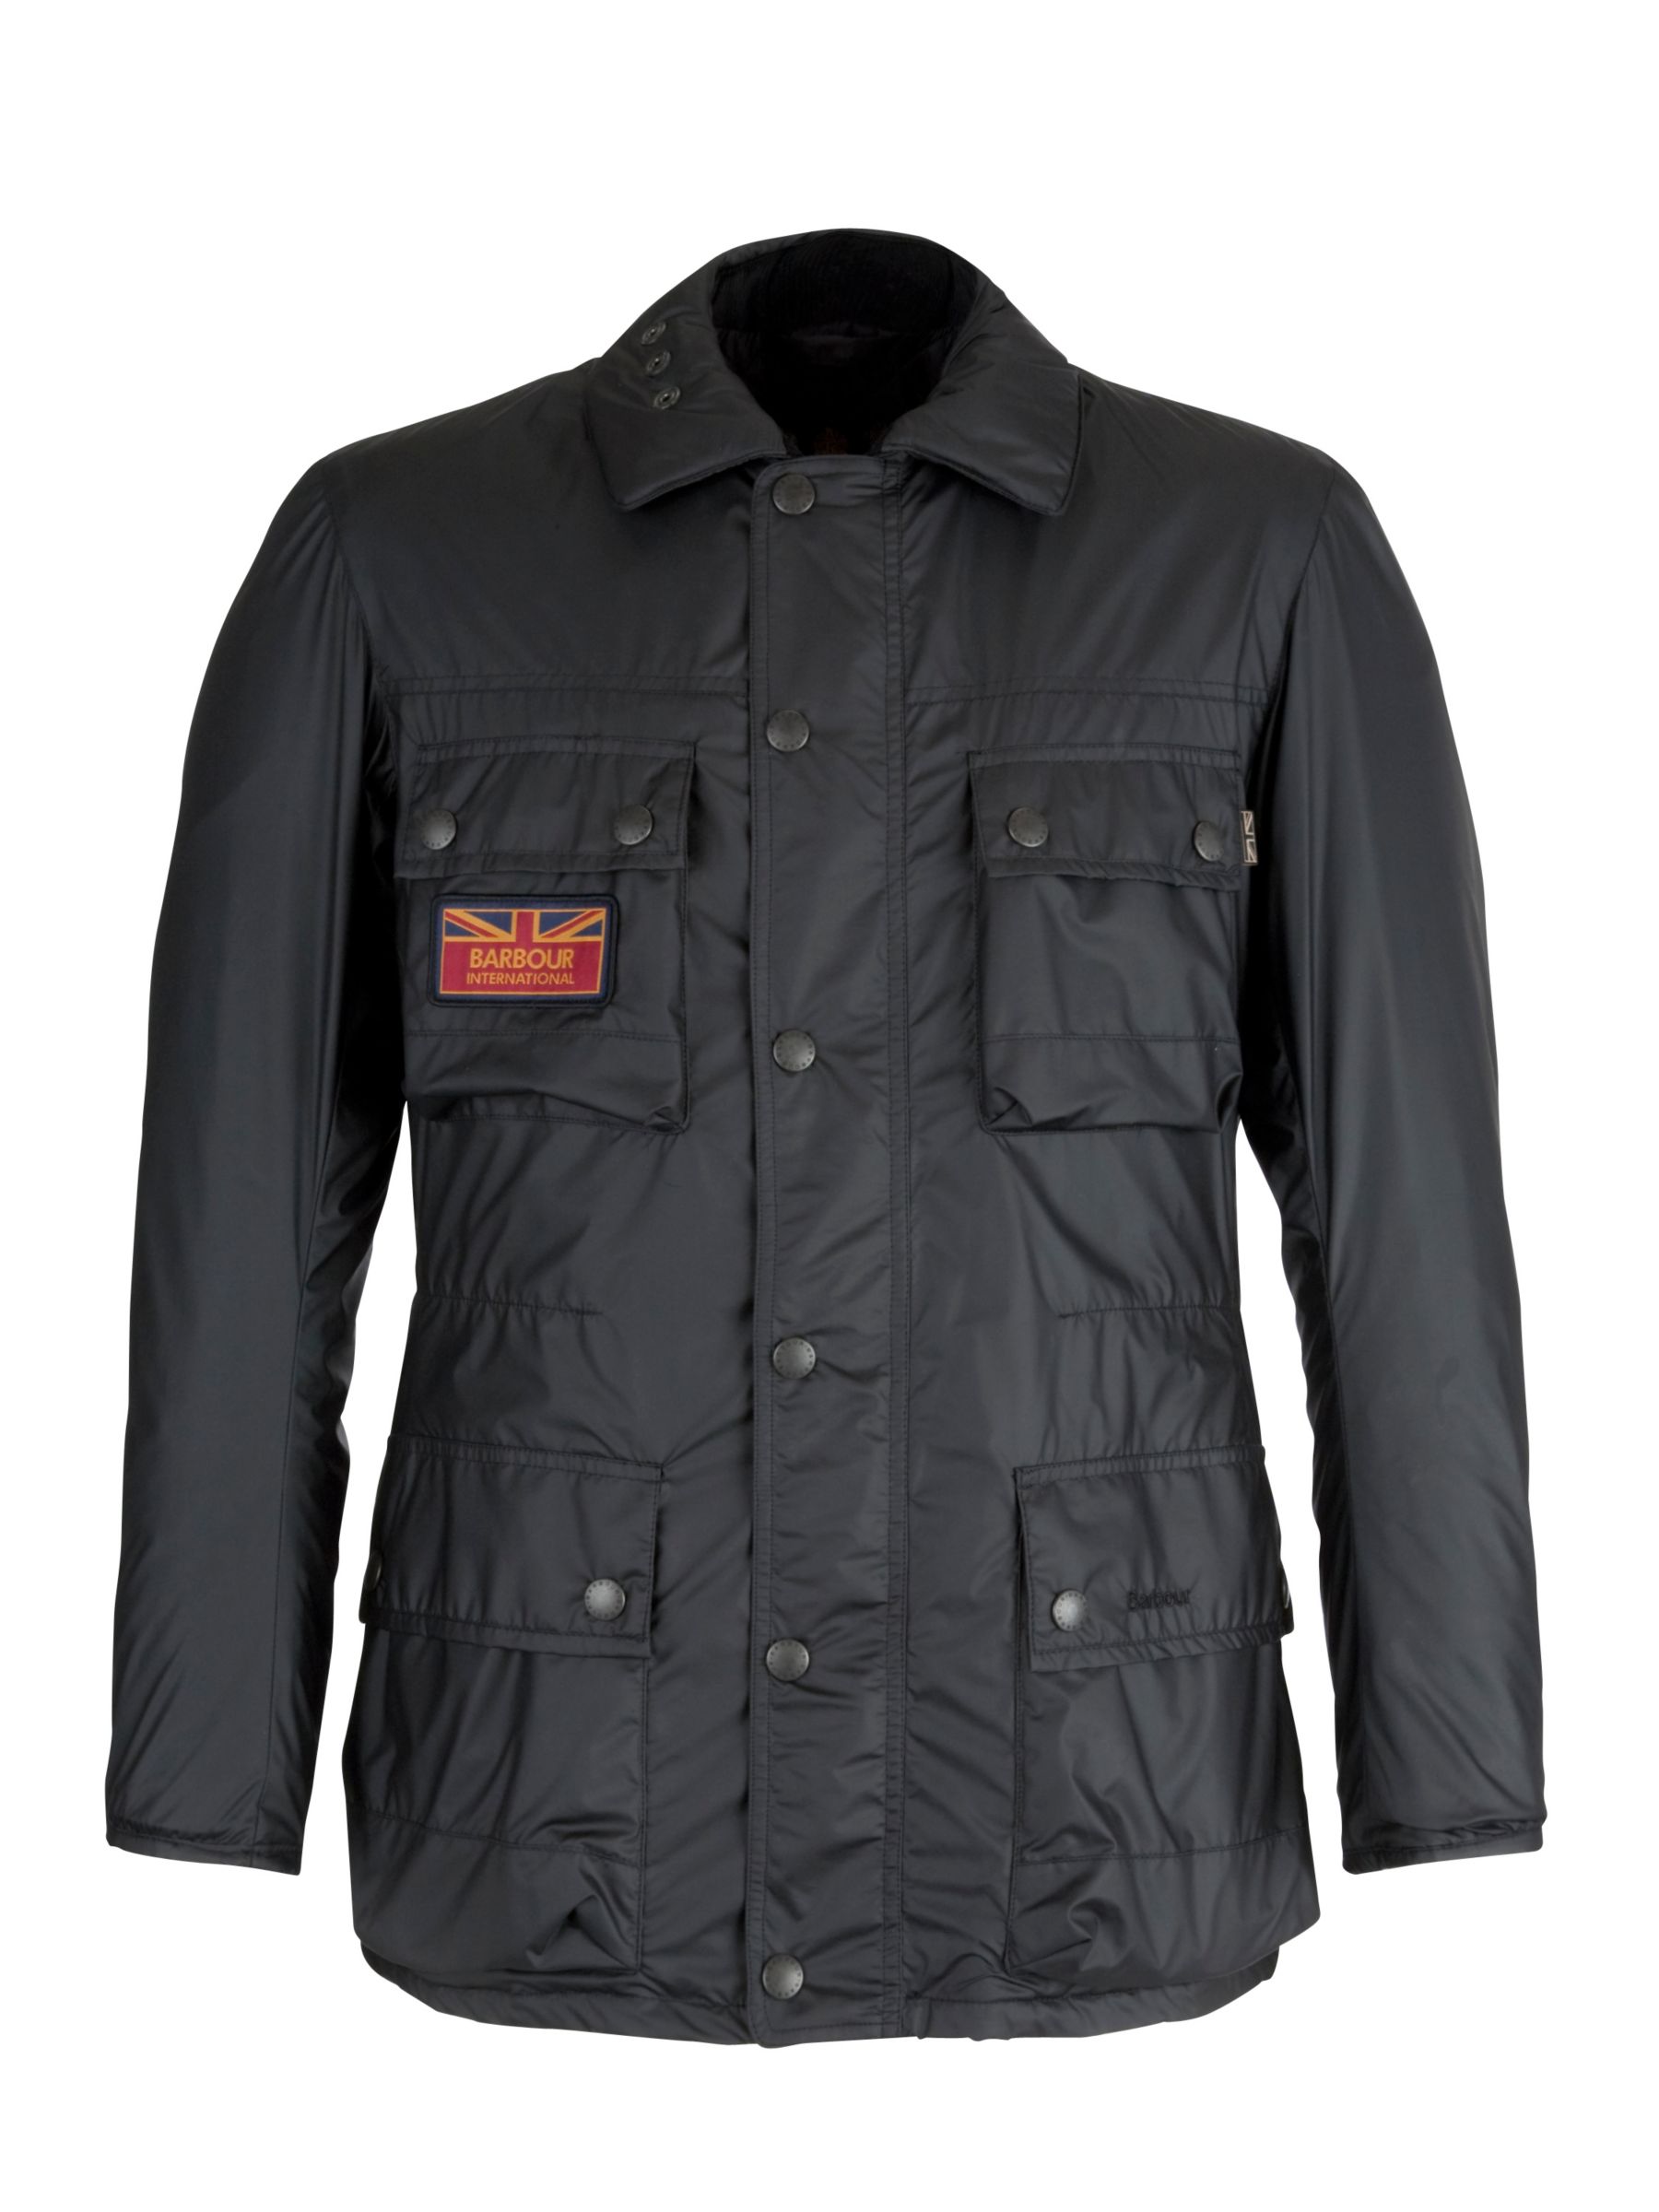 barbour offers